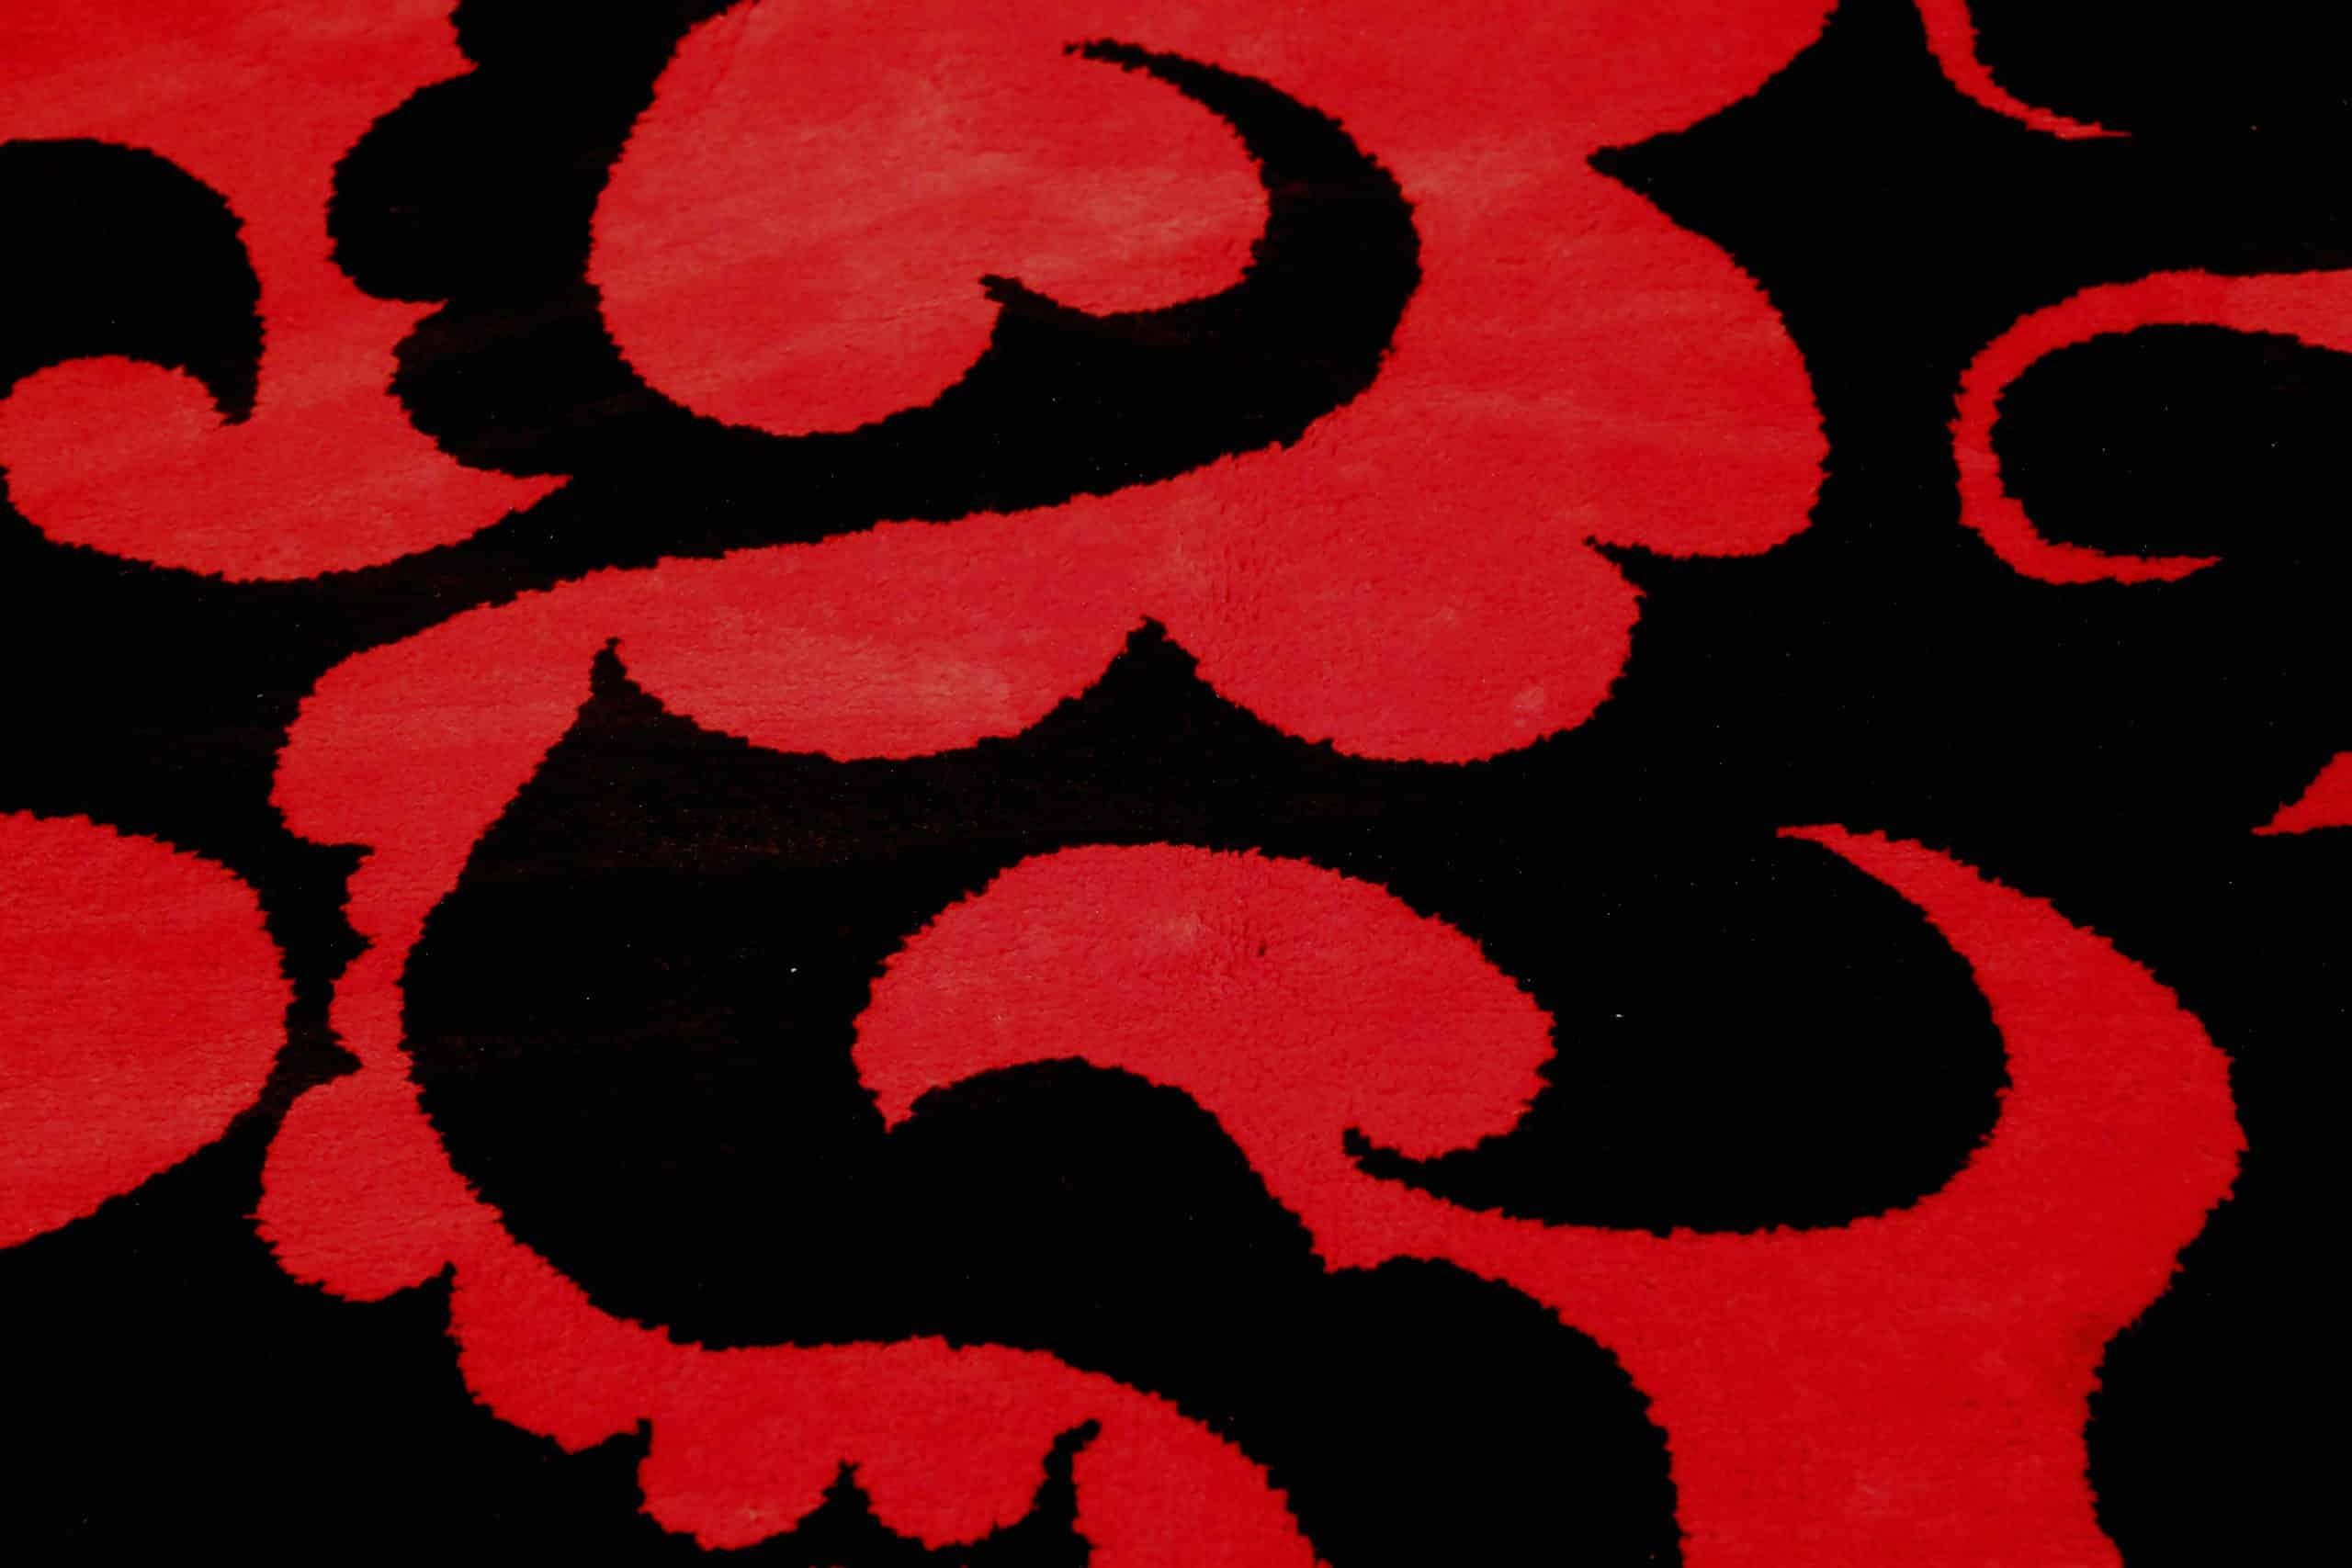 Vintage Red And Black Pablo Picasso Design Rug, Country of Origin: India, Circa date: Mid-Twentieth Century. Size: 6 ft 4 in x 8 ft 3 in (1.93 m x 2.51 m)

